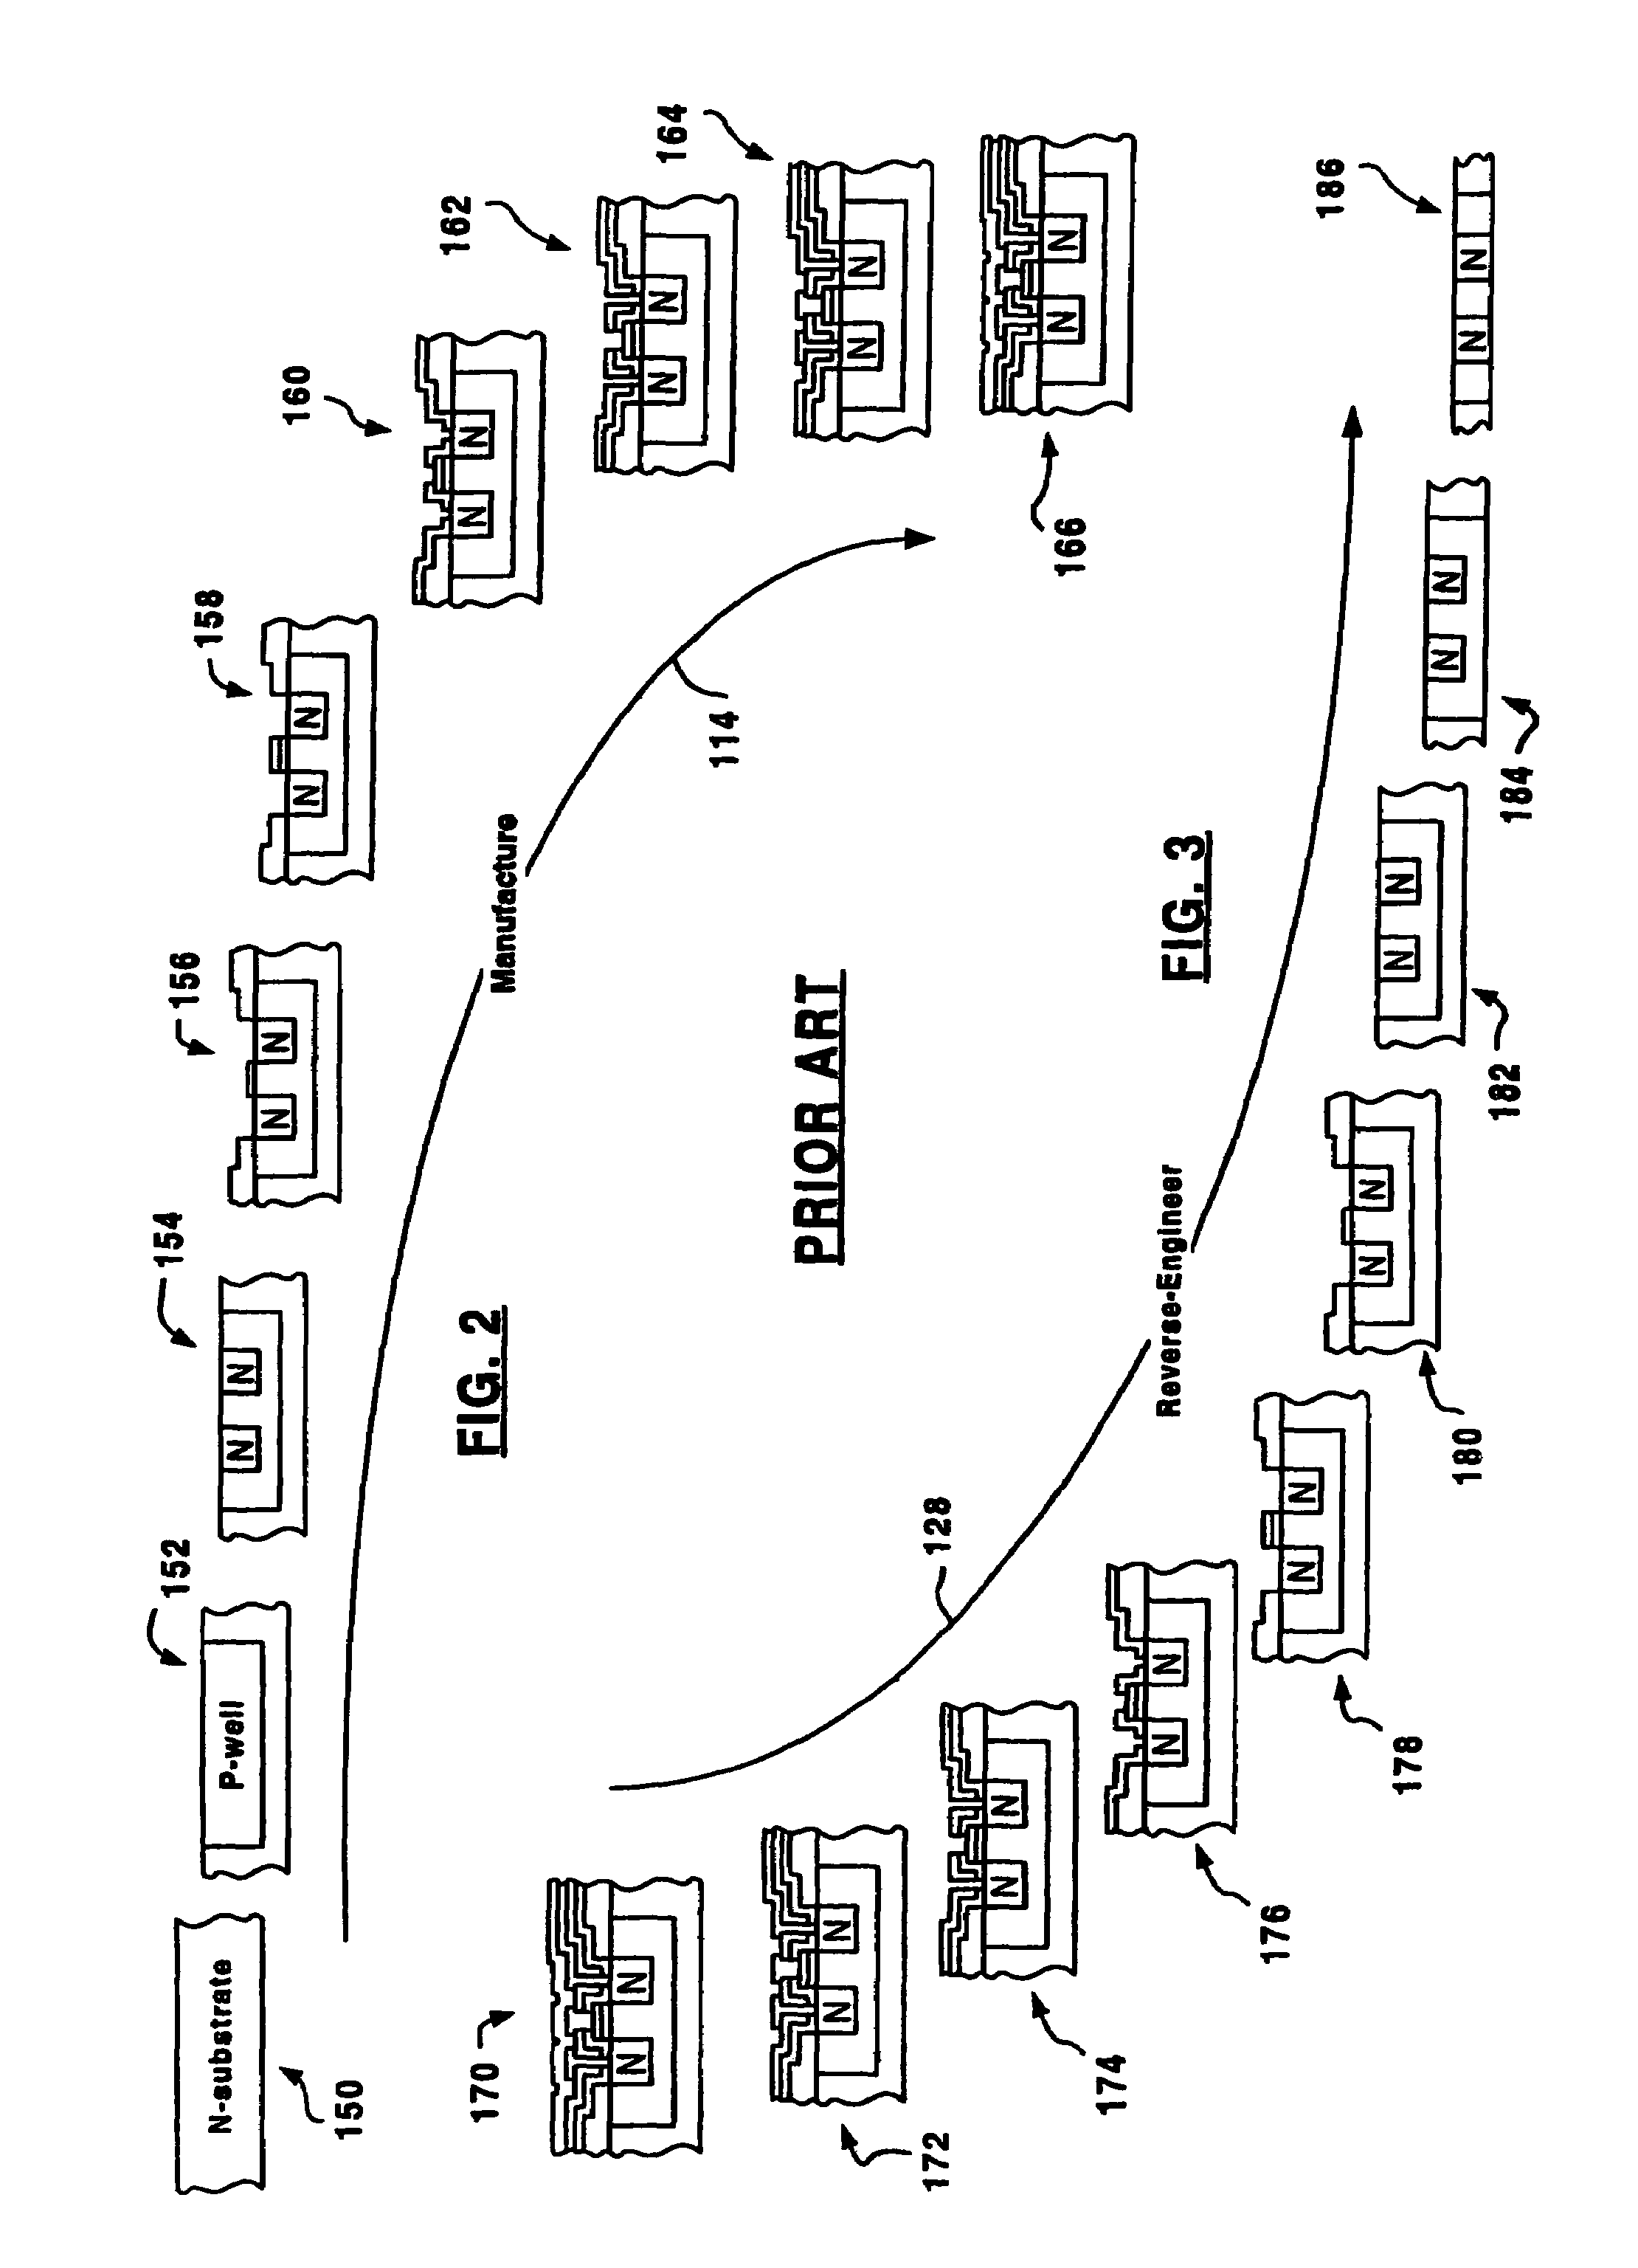 Design analysis workstation for analyzing integrated circuits